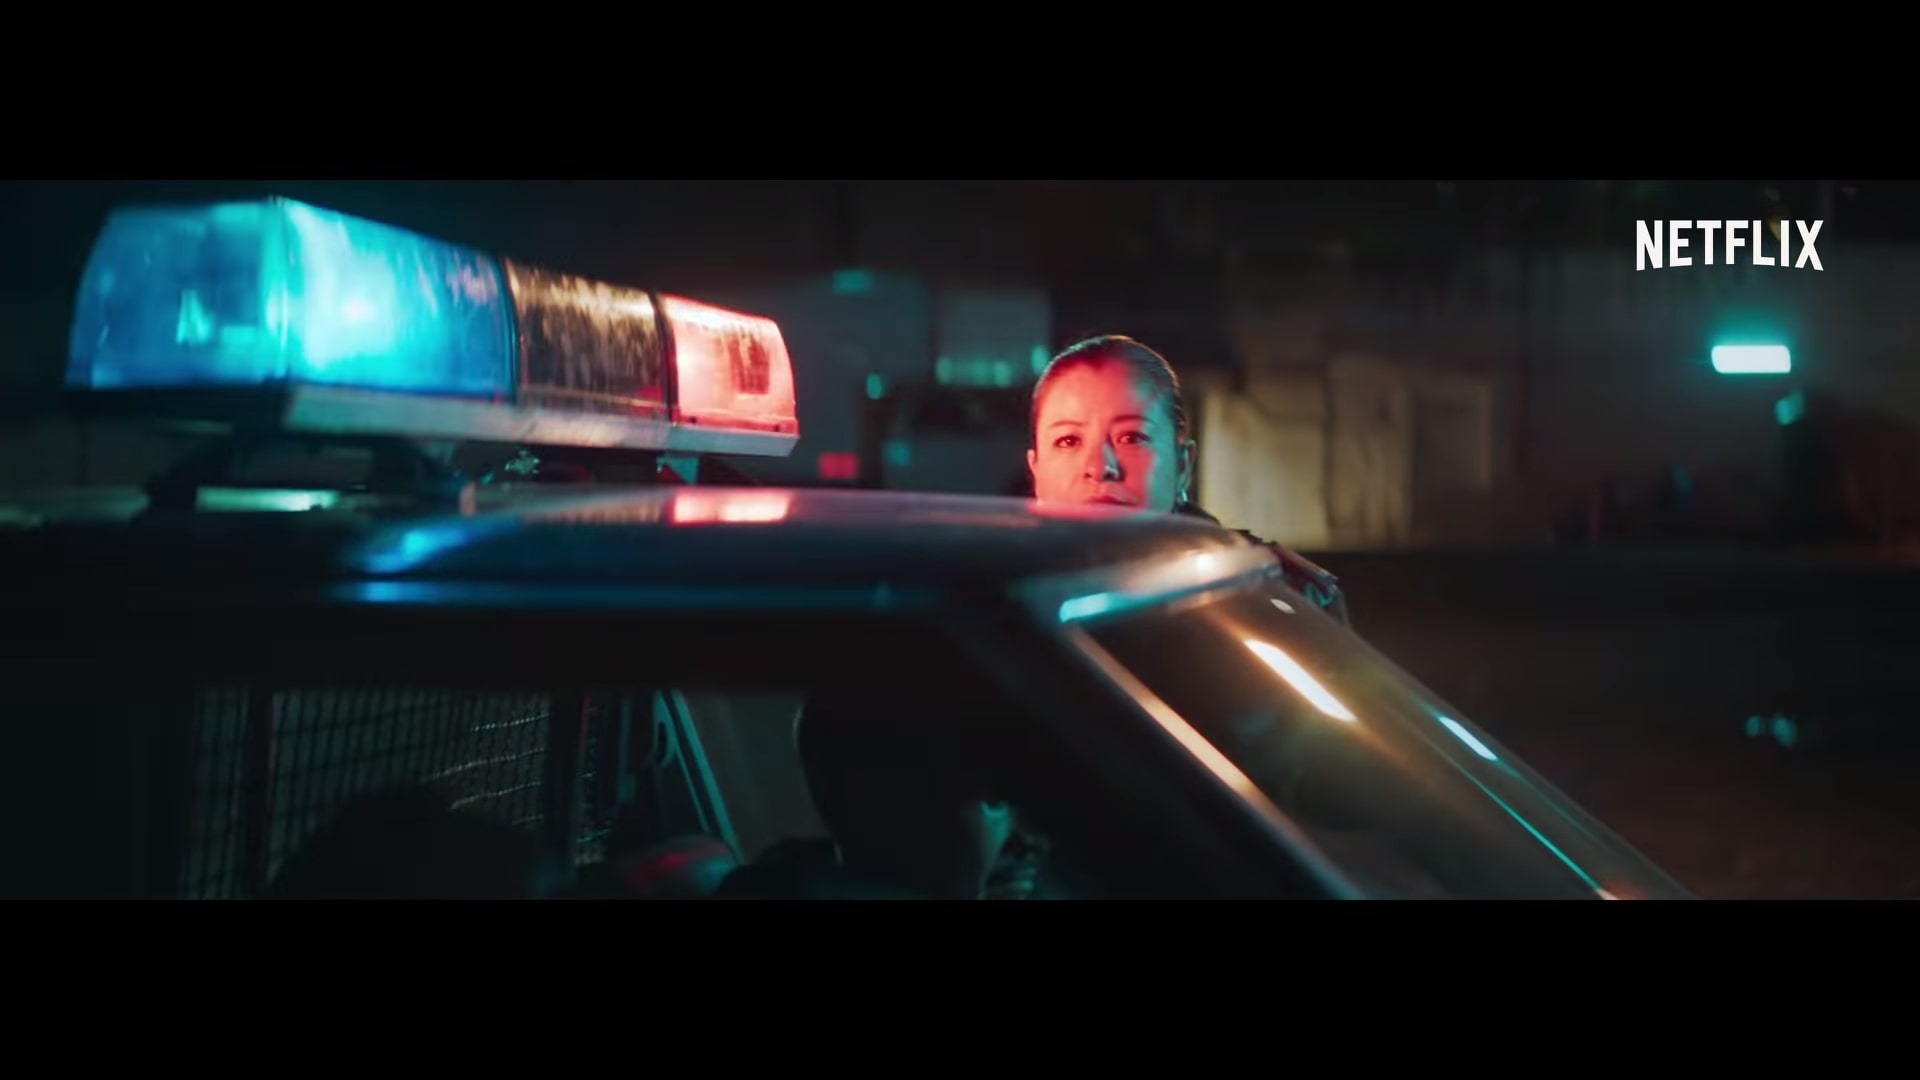 Netflix A Cop Movie Trailer, Coming to Netflix in November 2021